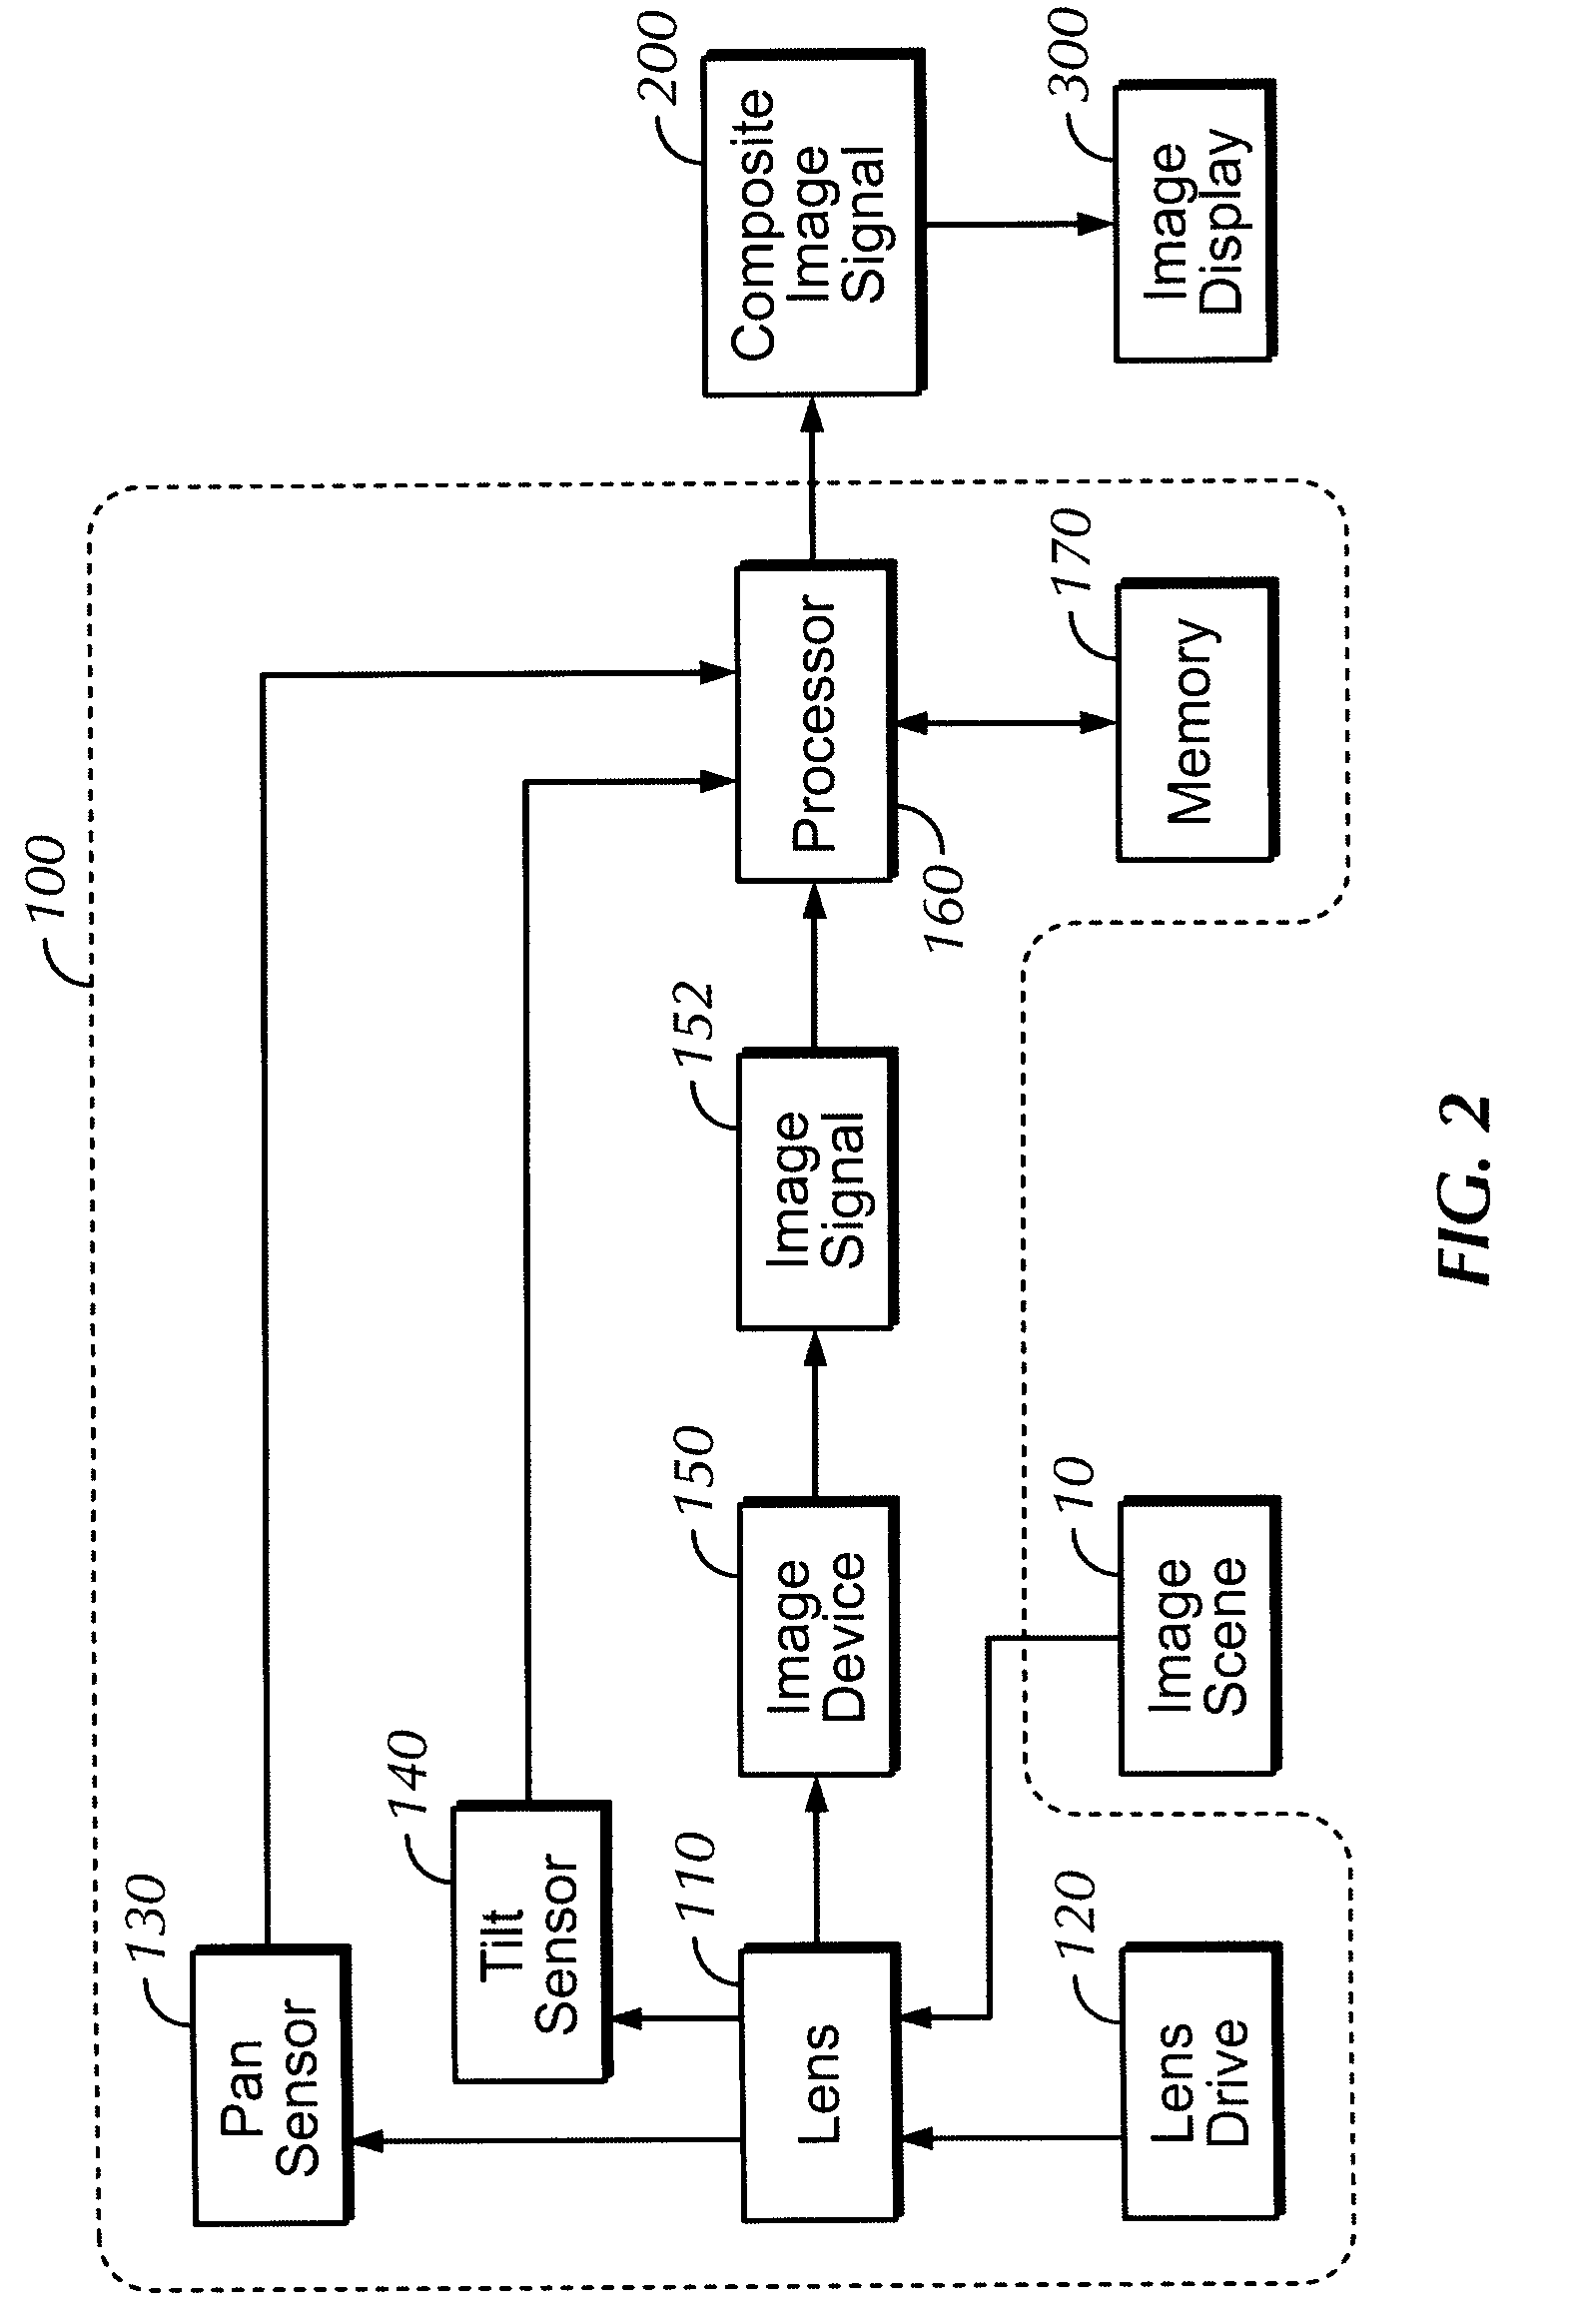 Method and apparatus for providing a video image having multiple focal lengths